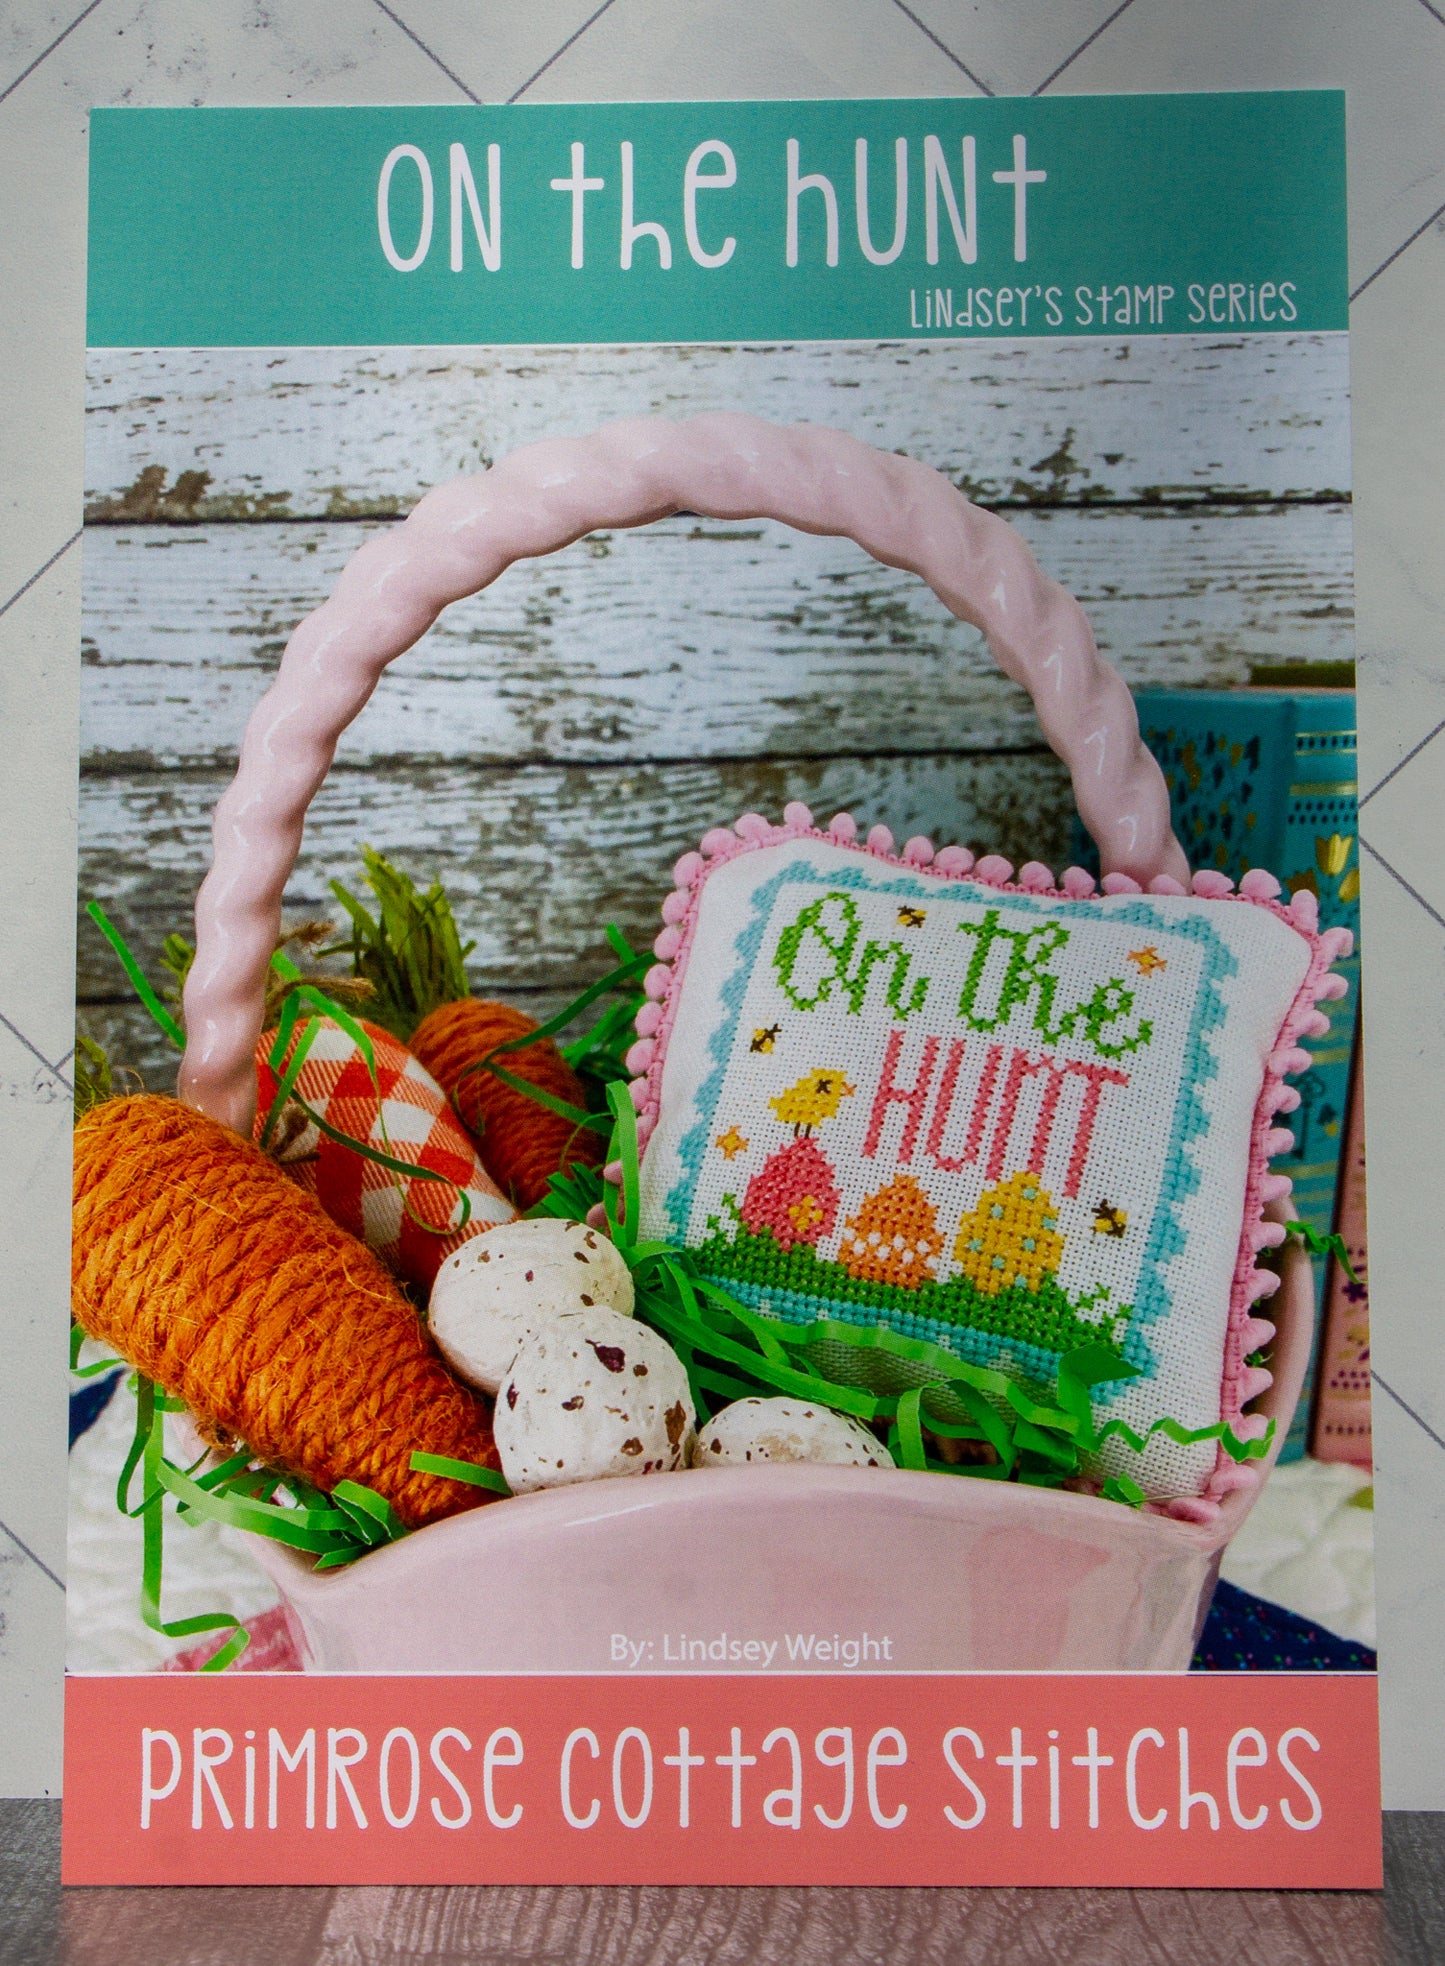 On The Hunt by Primrose Cottage Stitches